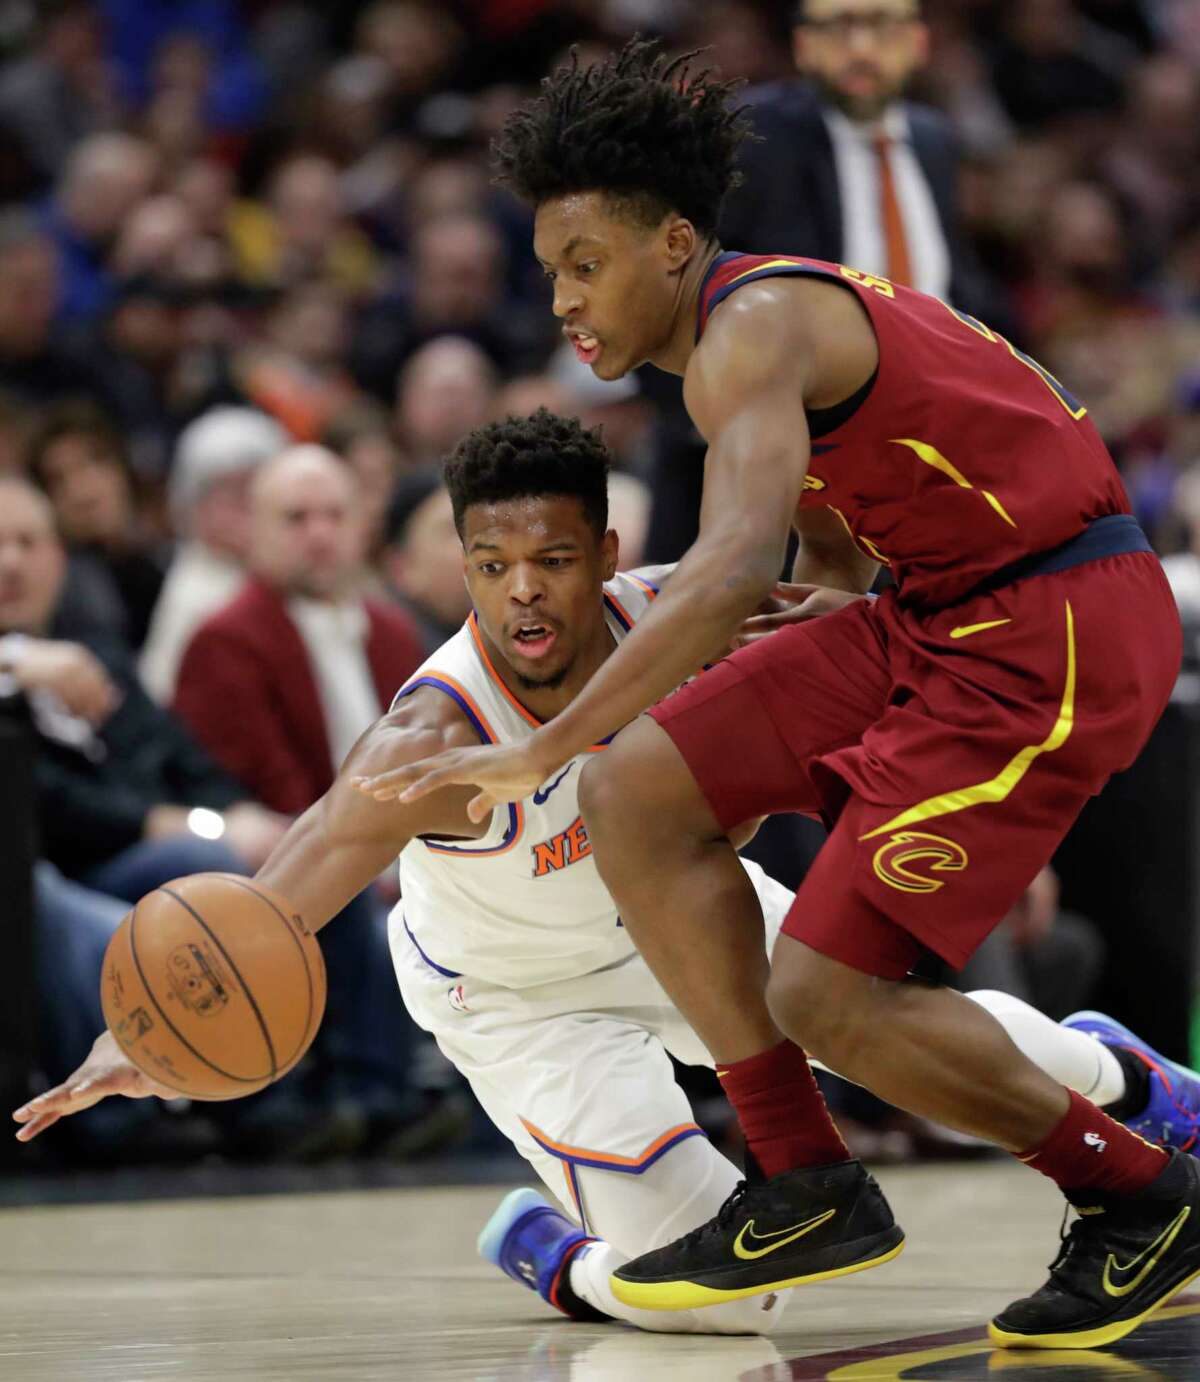 New York Knicks' Dennis Smith Jr., left, and Cleveland Cavaliers' Collin Sexton battle for a loose ball in the second half of an NBA basketball game, Monday, Feb. 11, 2019, in Cleveland. The Cavaliers won 107-104. (AP Photo/Tony Dejak)